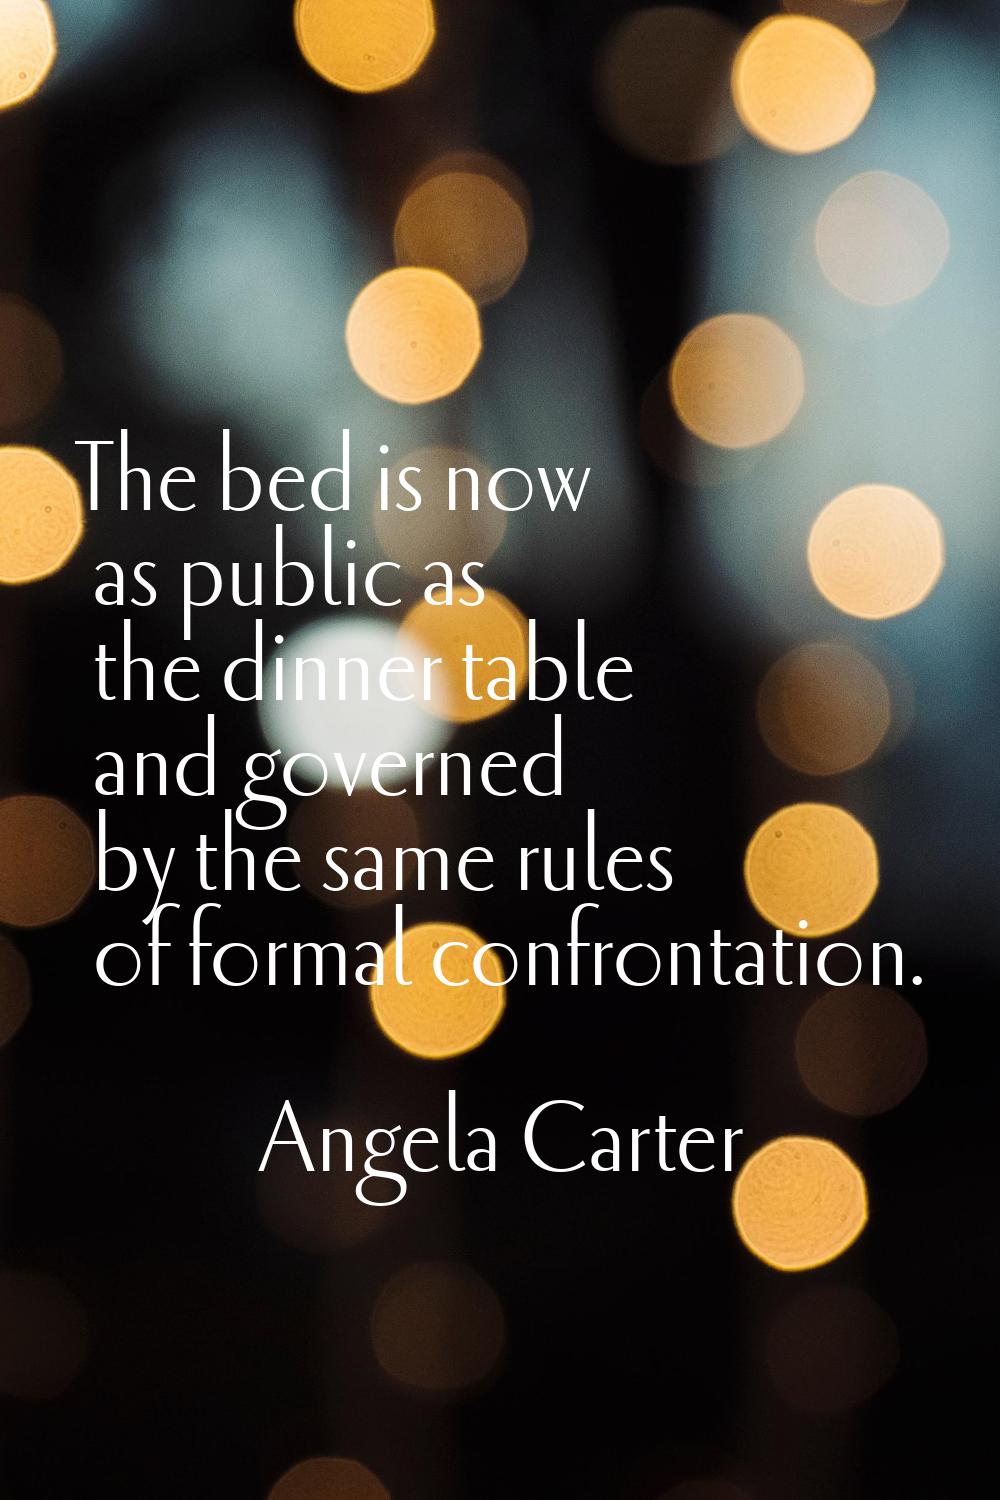 The bed is now as public as the dinner table and governed by the same rules of formal confrontation